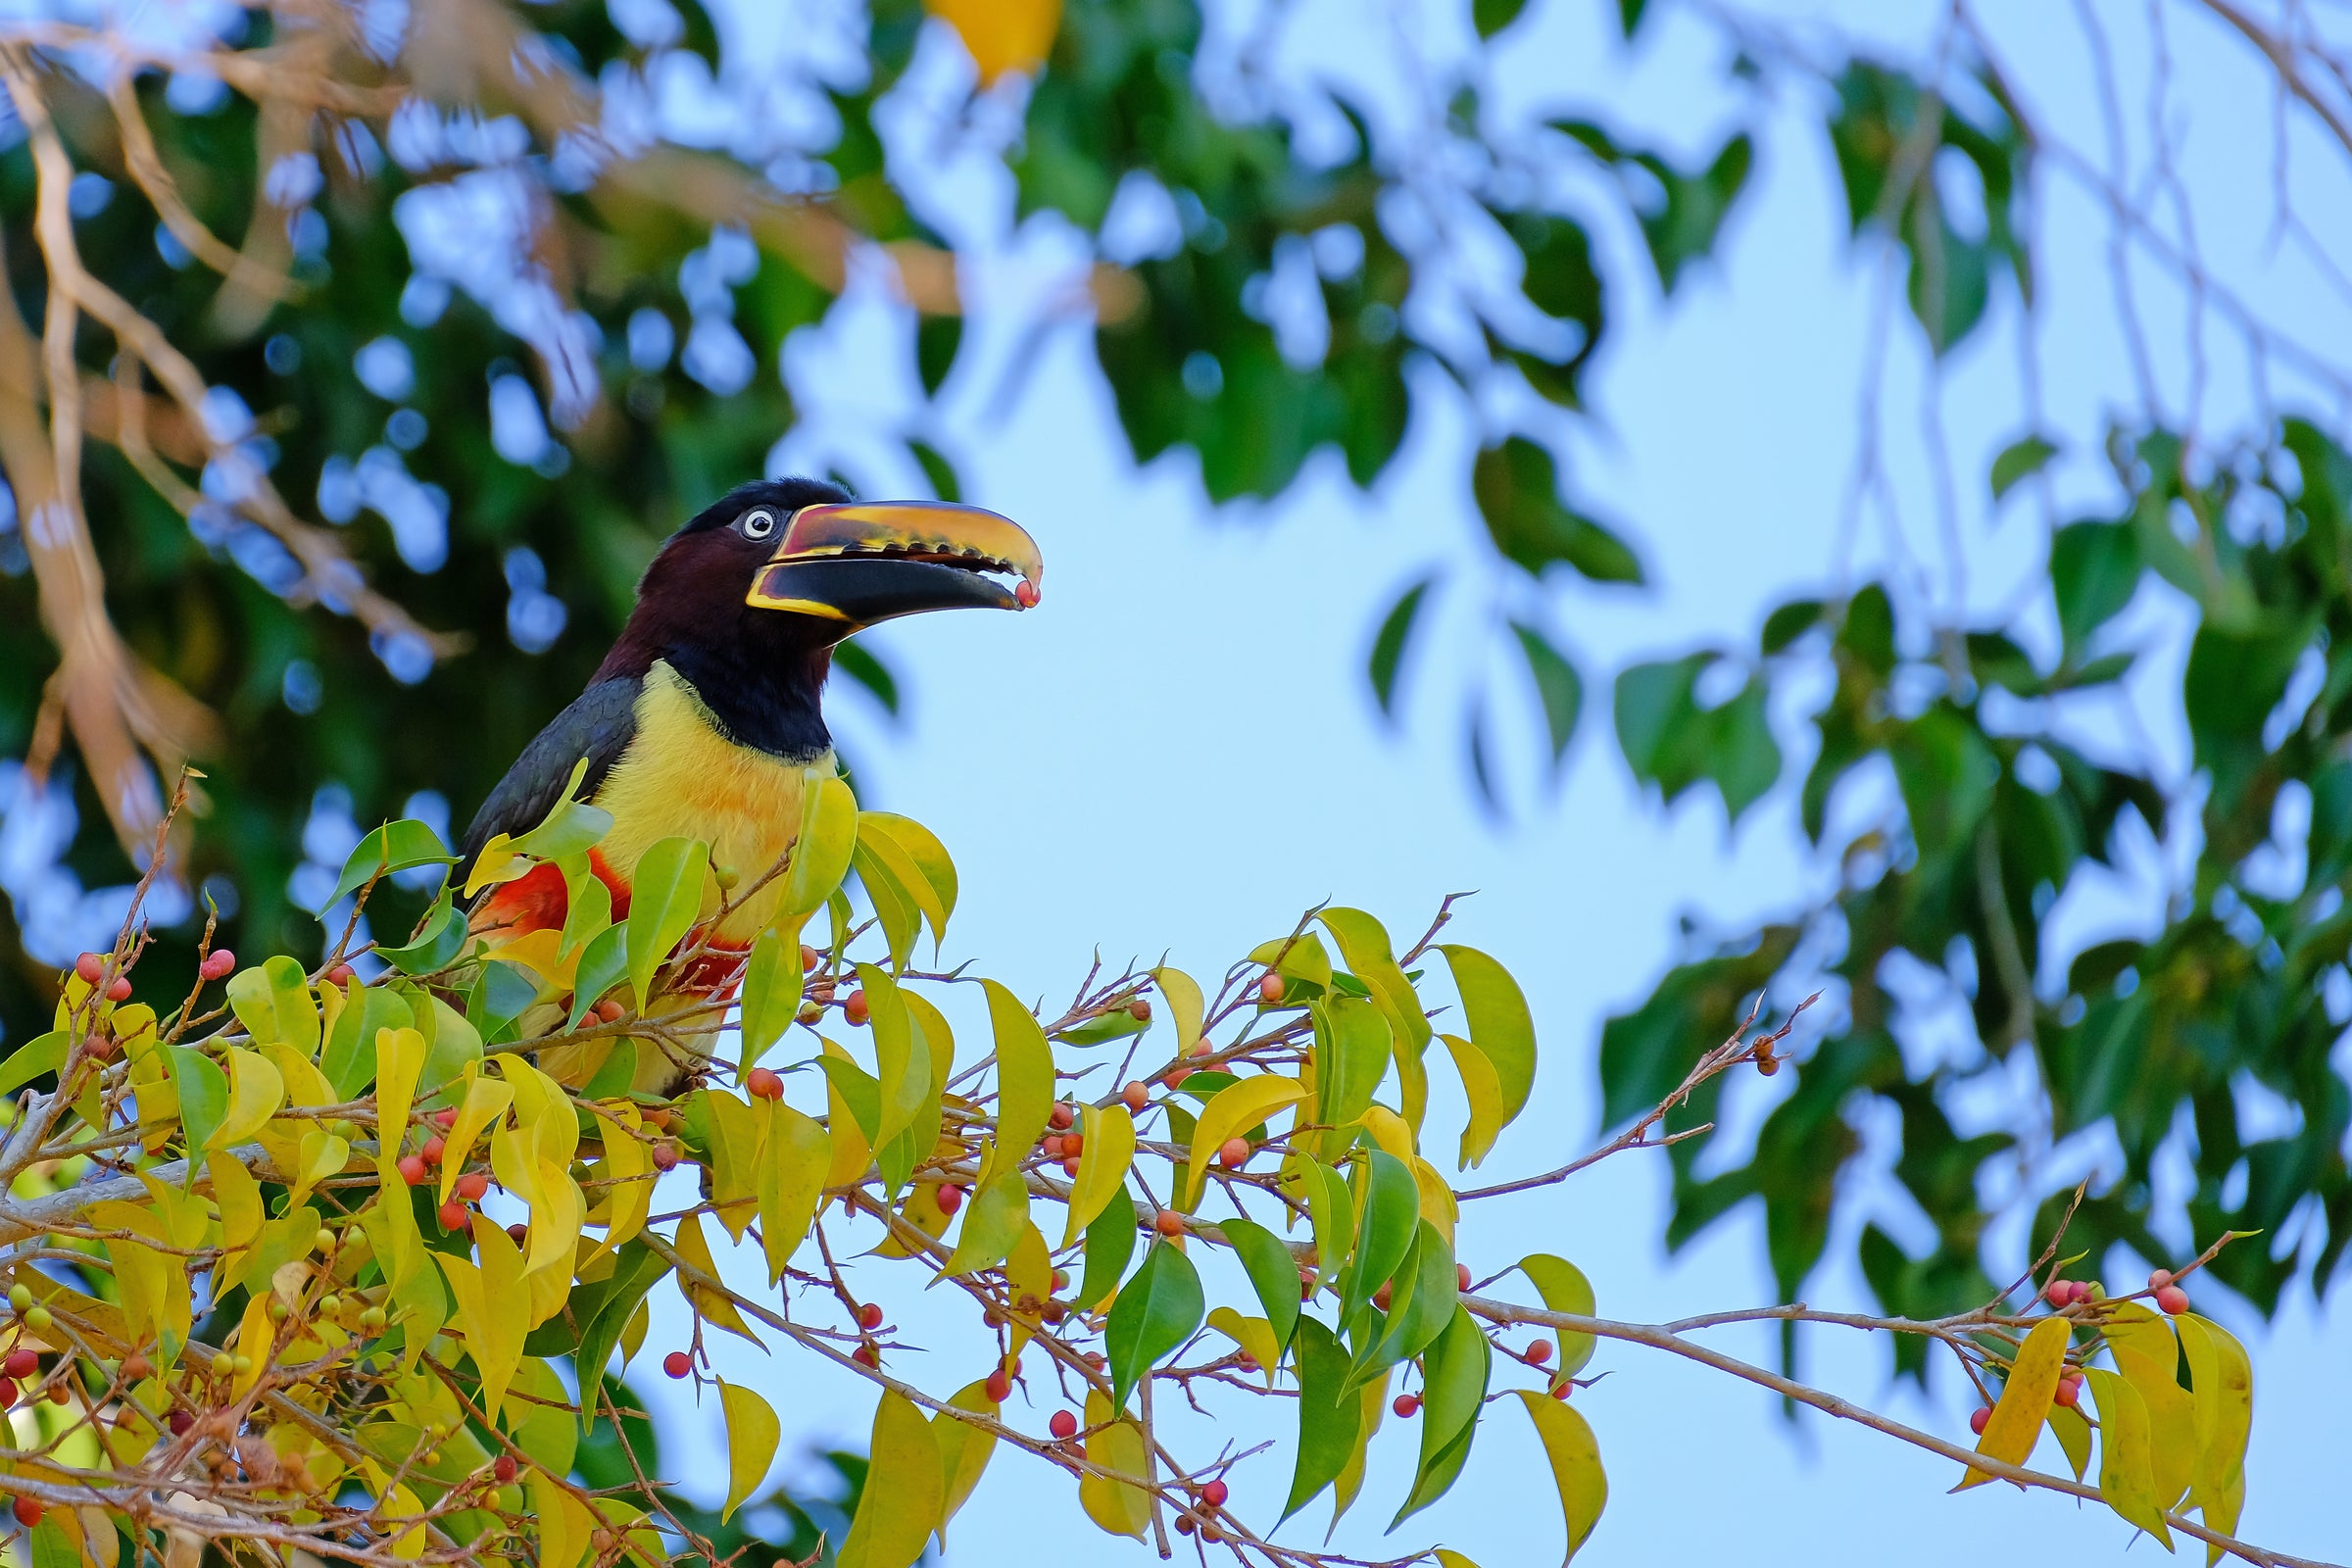 A wild Aracari toucan sitting in a tree in Costa Rica, eating a coffee cherry